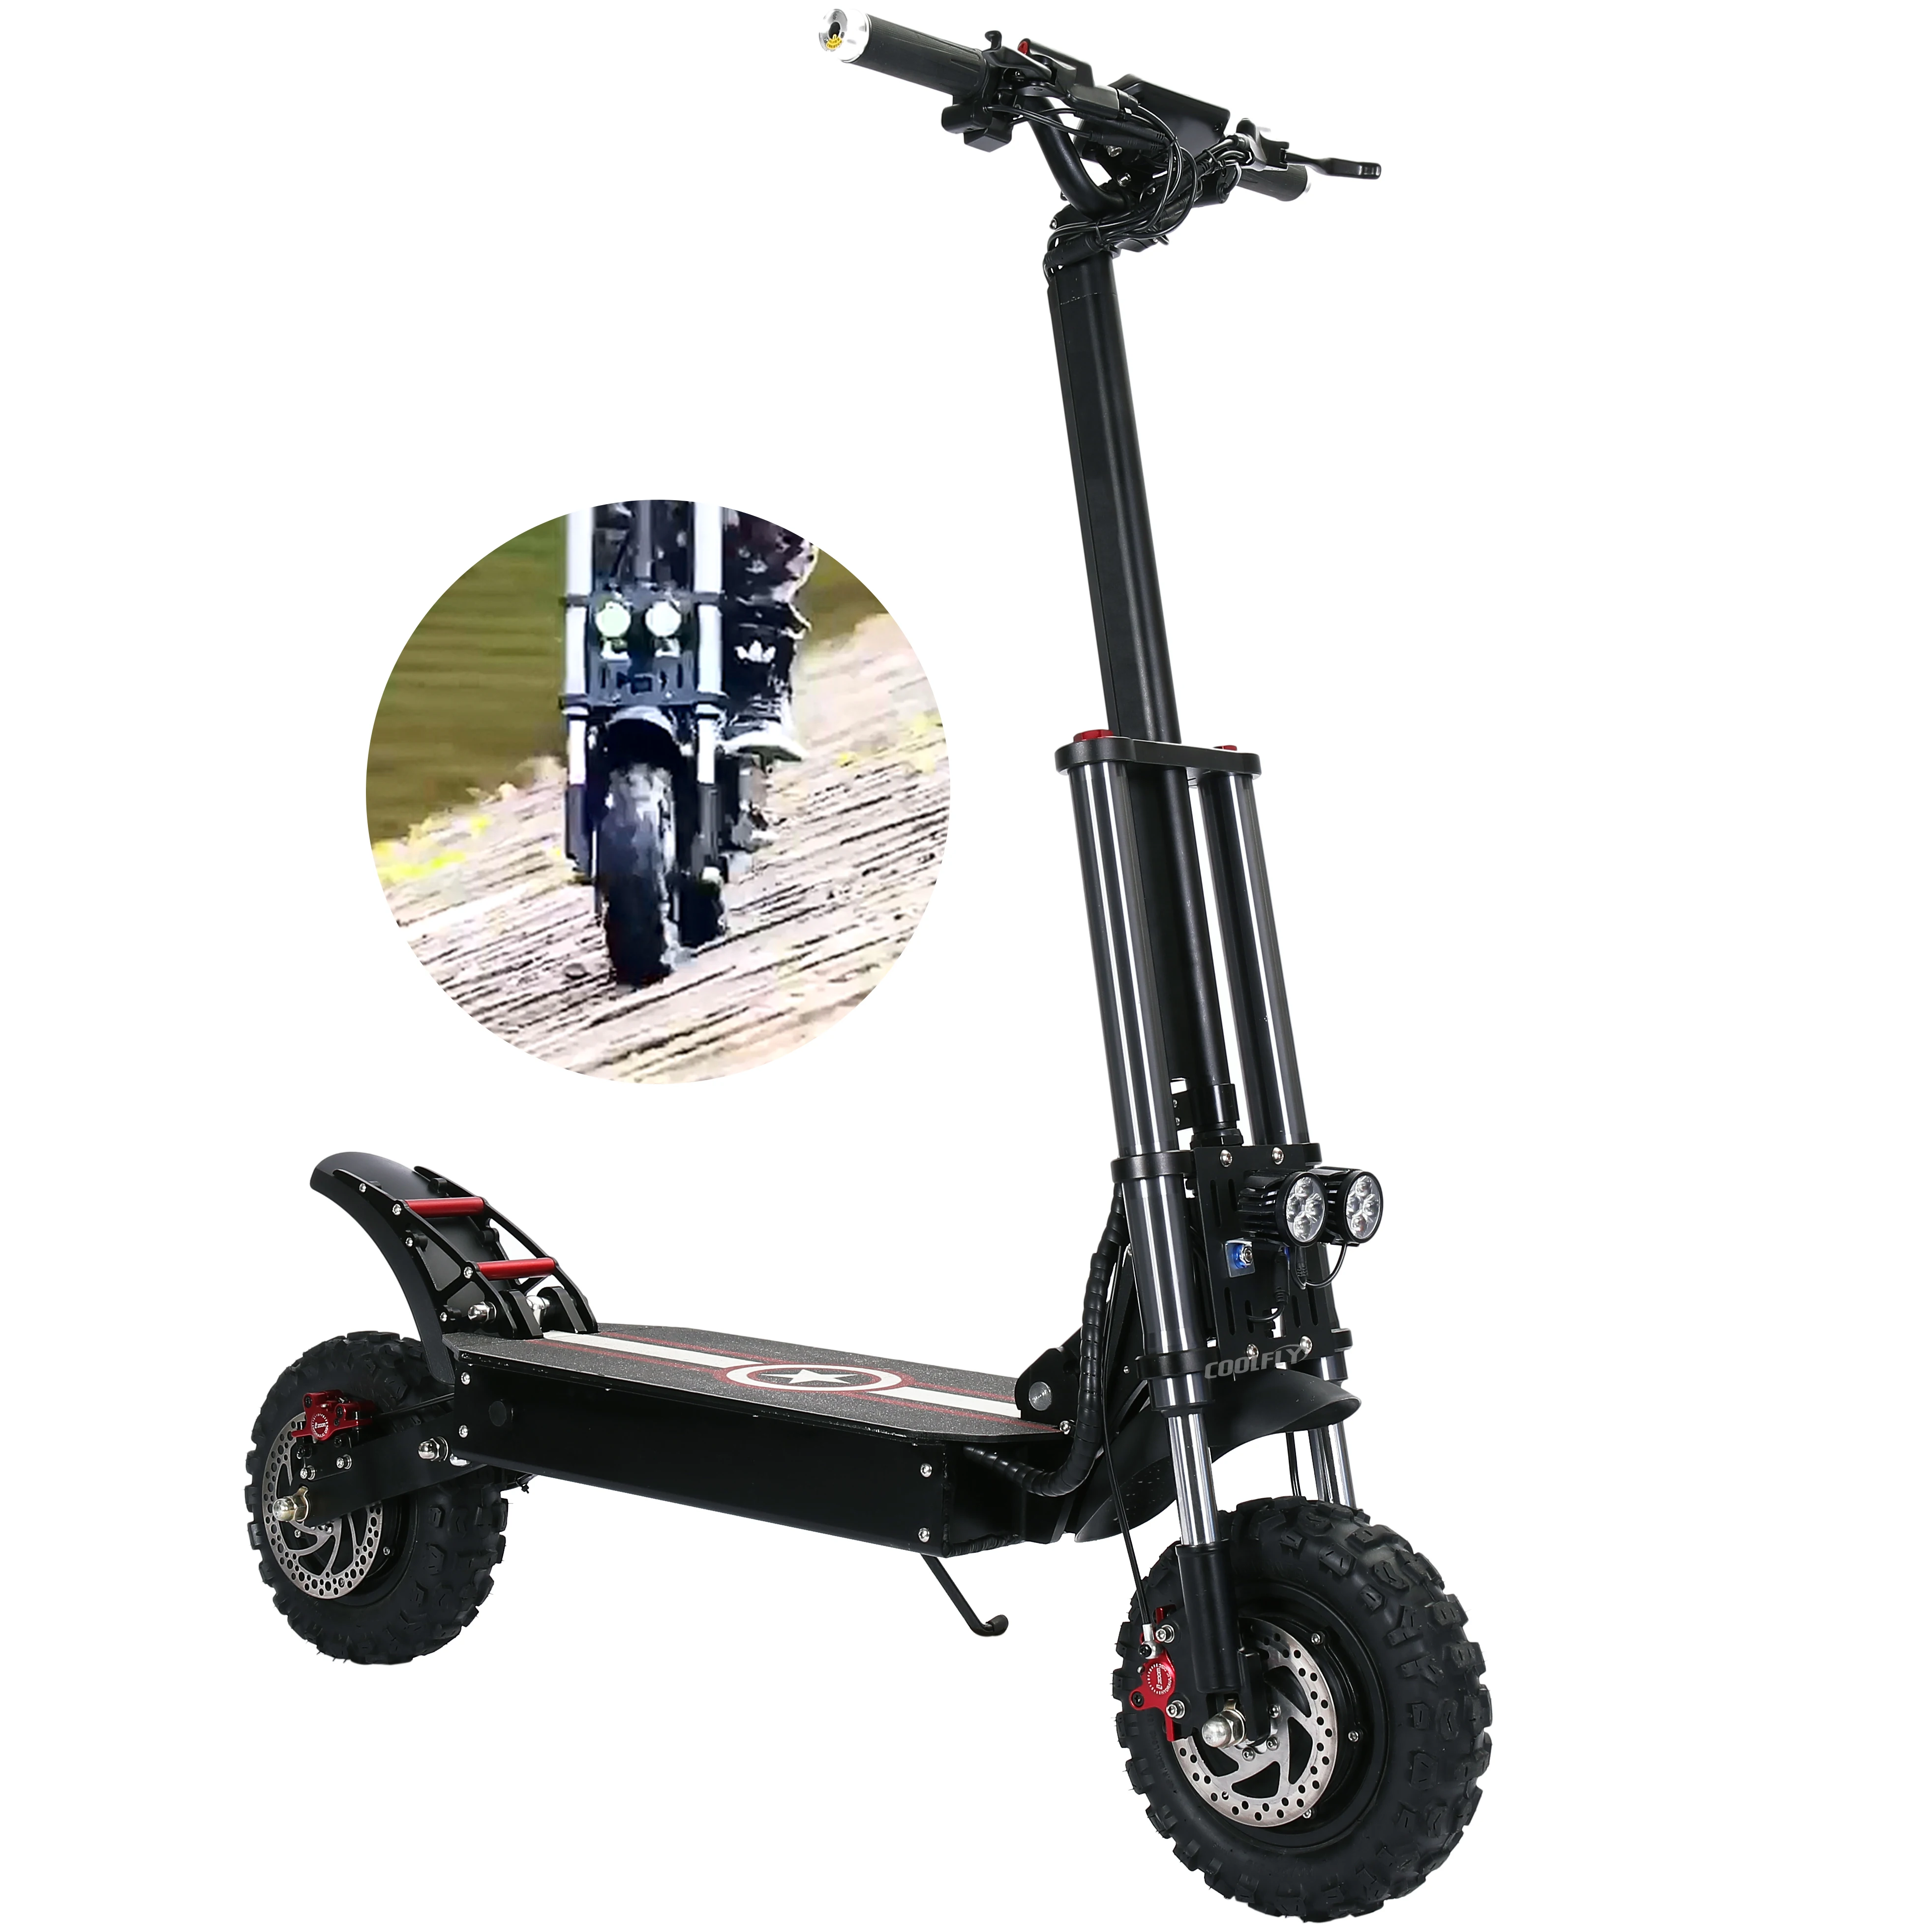 

Coolfly 3200w off road 2 wheels big power e scooters fastest electric scooter with 60v 20ah lithium battery